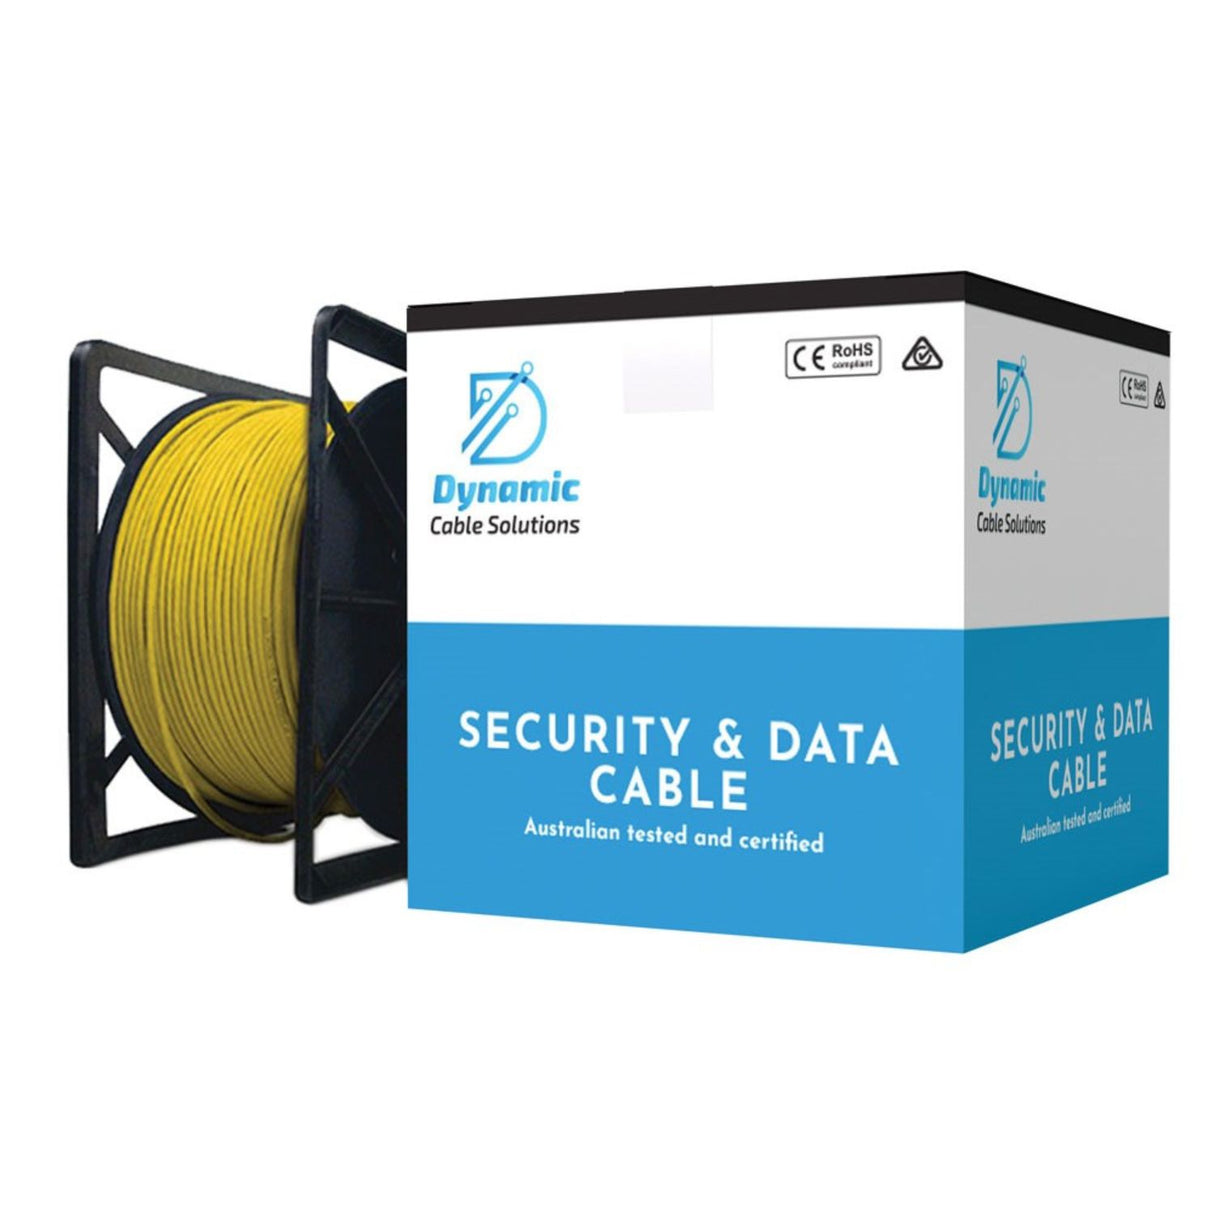 Dynamic Cable Solutions CAT6 - 305m Box, Assorted Colours